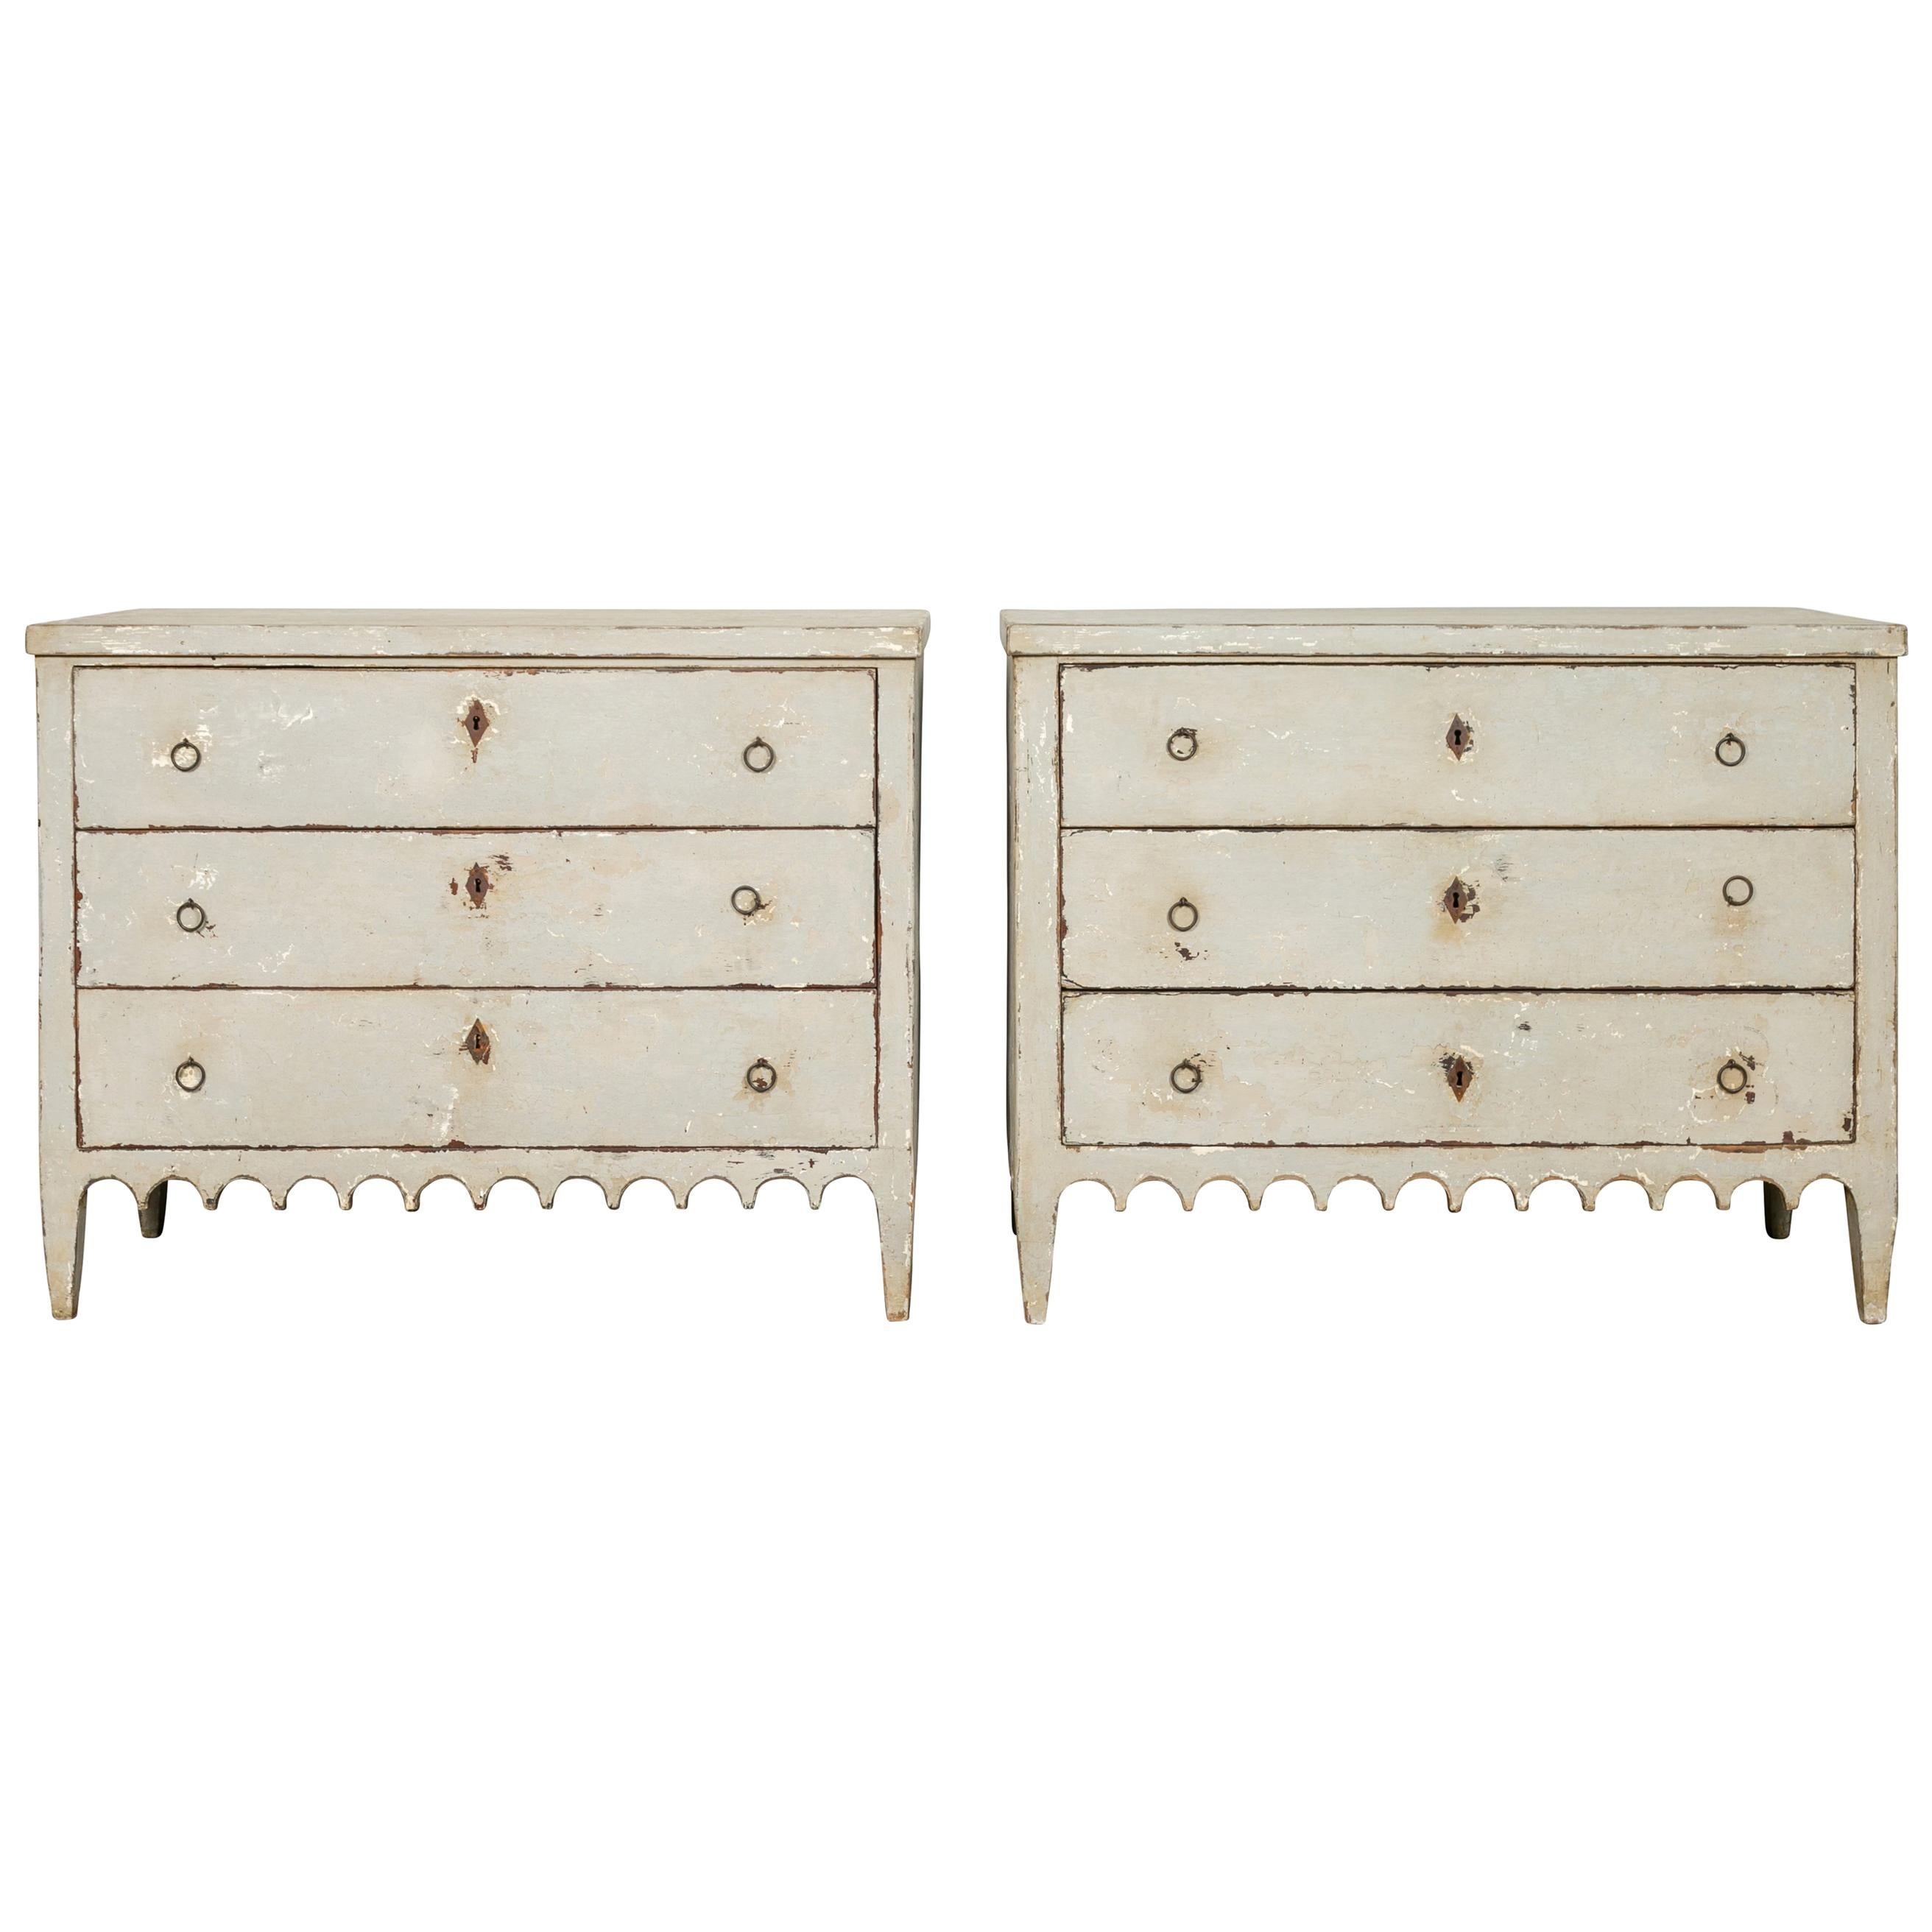 Pair of 1870s Portuguese Painted Three-Drawer Commodes with Scalloped Aprons